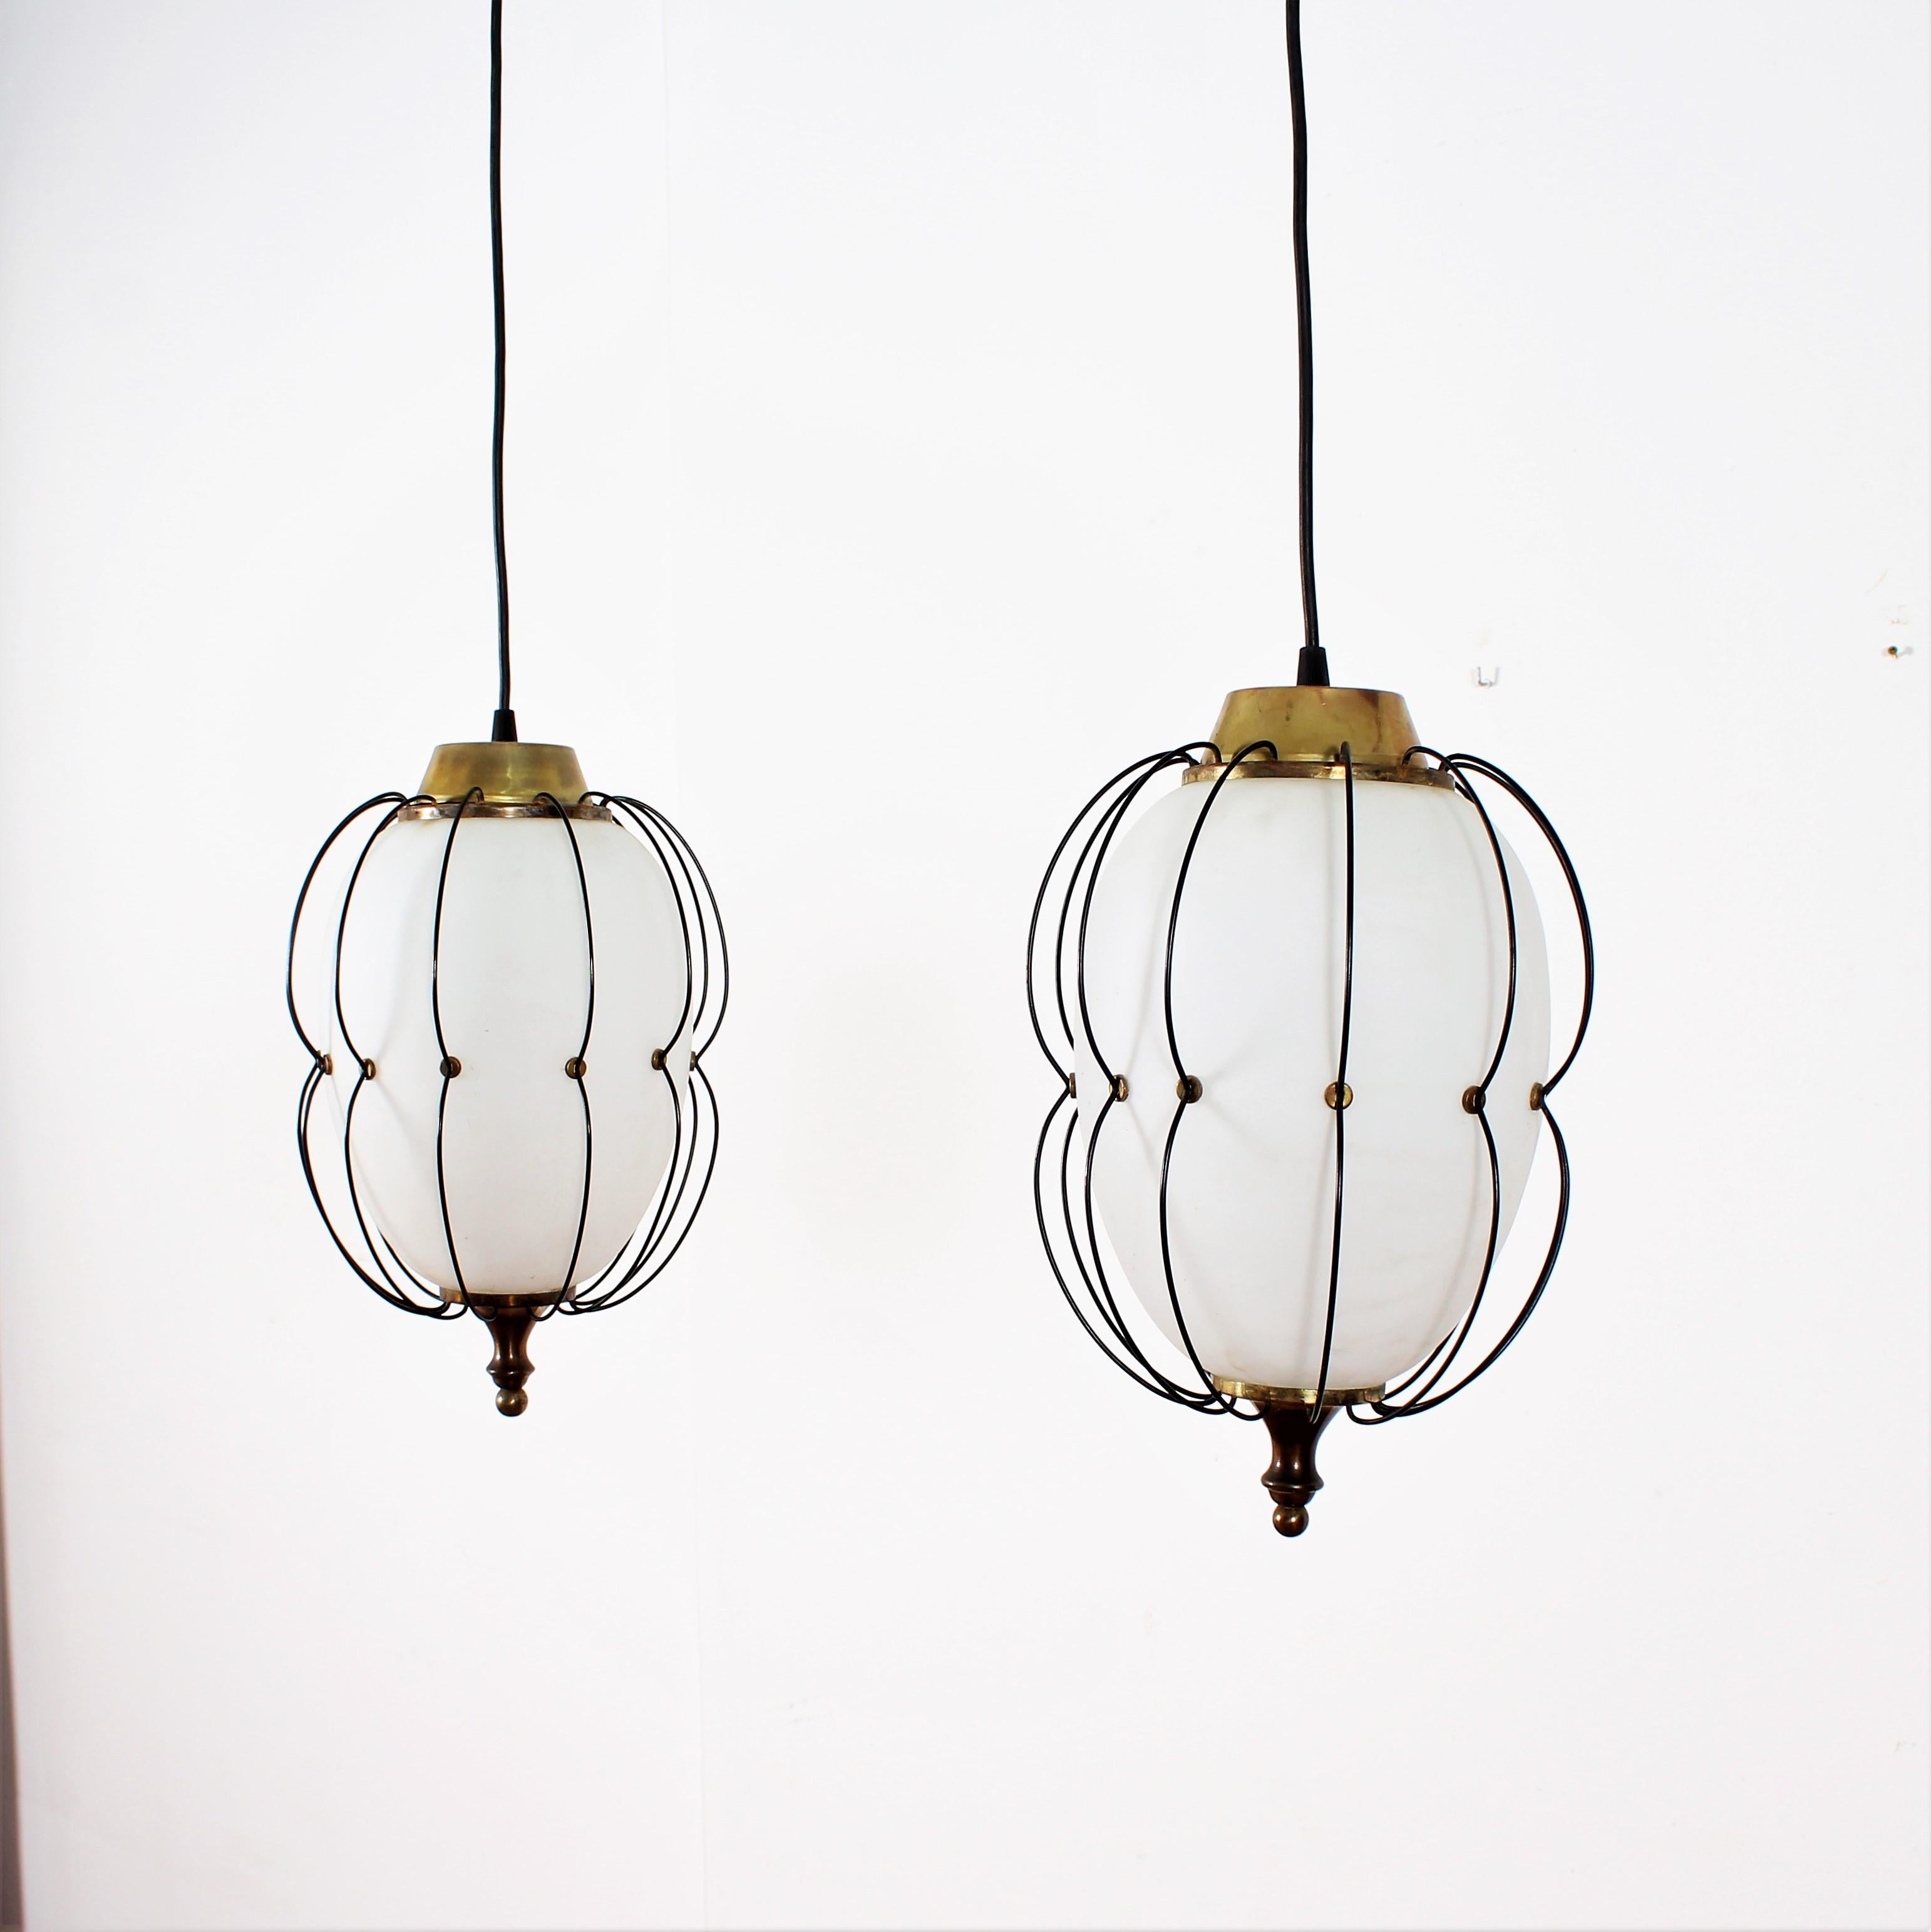 Midcentury brass and white opaline glass chandelier attributed to Angelo Lelii for Arredoluce Monza (Italy) in 1960s.
Wear consistent with age and use.
 